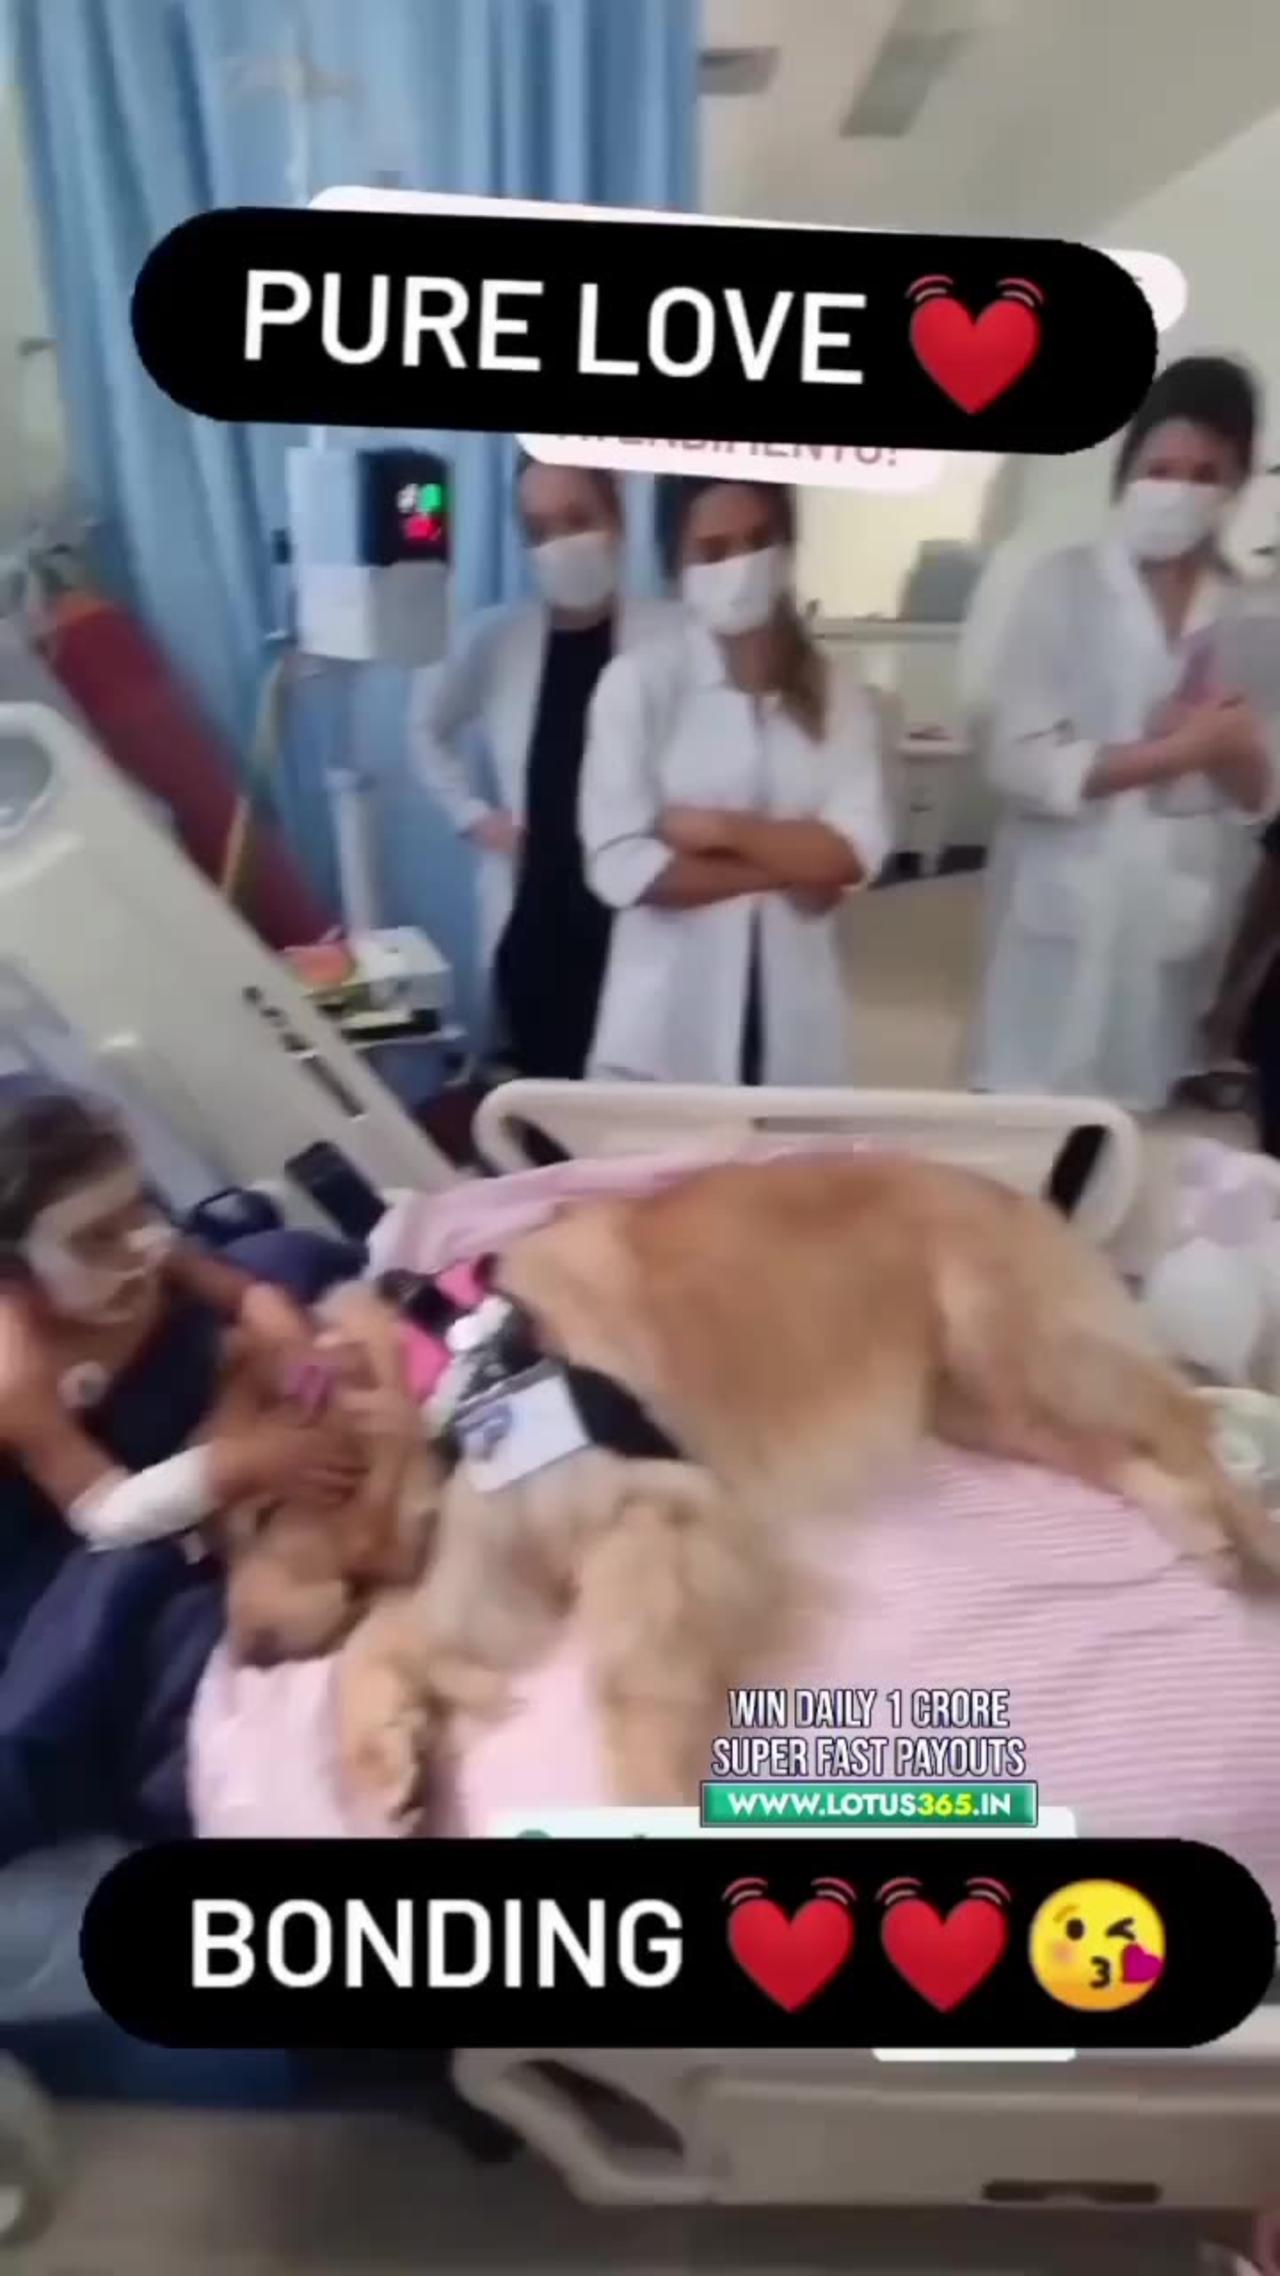 A Dog Heart Touching Baby ❤️‍🩹 , Baby and Dog Together in Hospital on a Bed 💔.